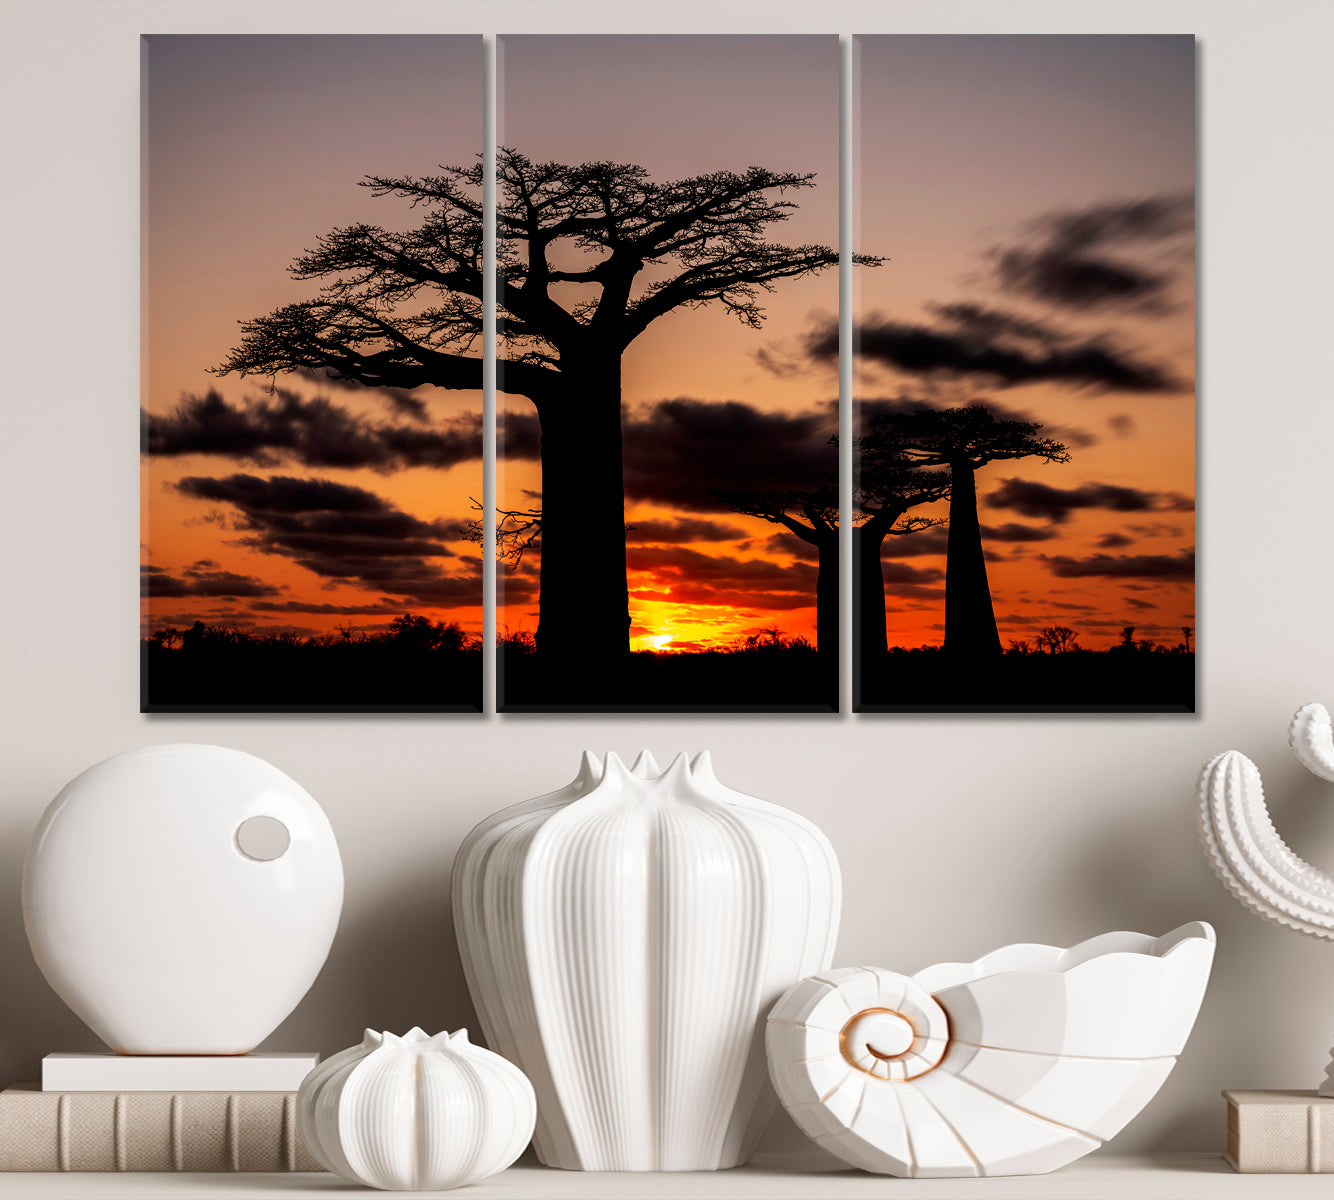 African Landscape Night View Huge Baobabs Nature Wall Canvas Print Artesty 3 panels 36" x 24" 